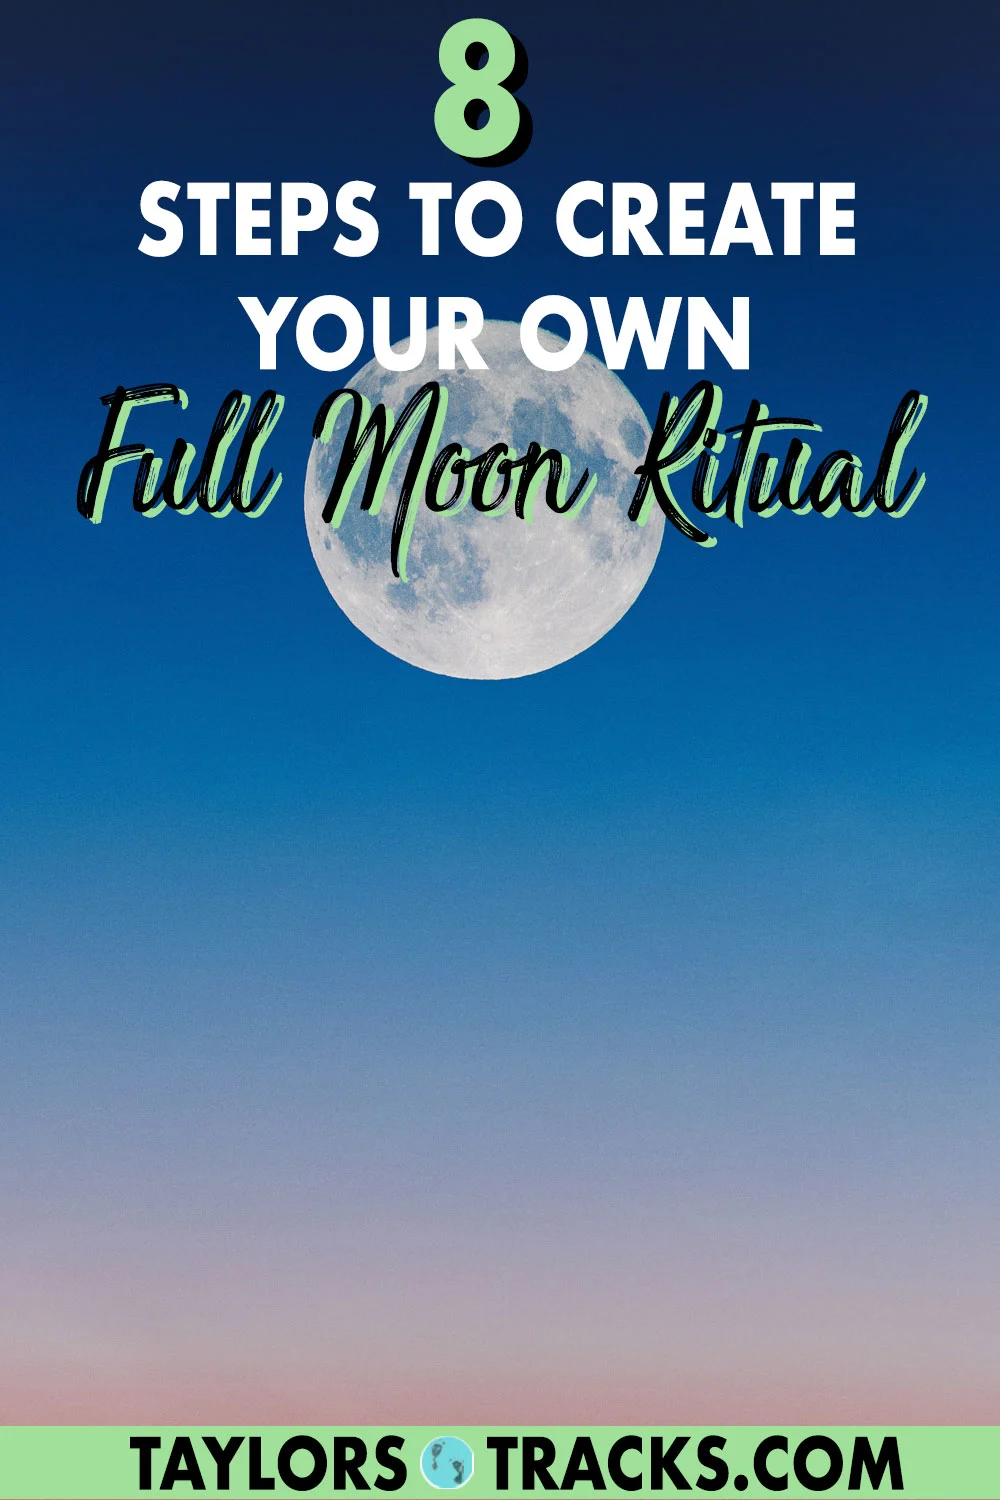 This full moon ritual is simple yet powerful. Learn how to manifest with the moon and let go with this full moon ceremony designed to let you release what is no longer serving you. Click to start your moon ritual!